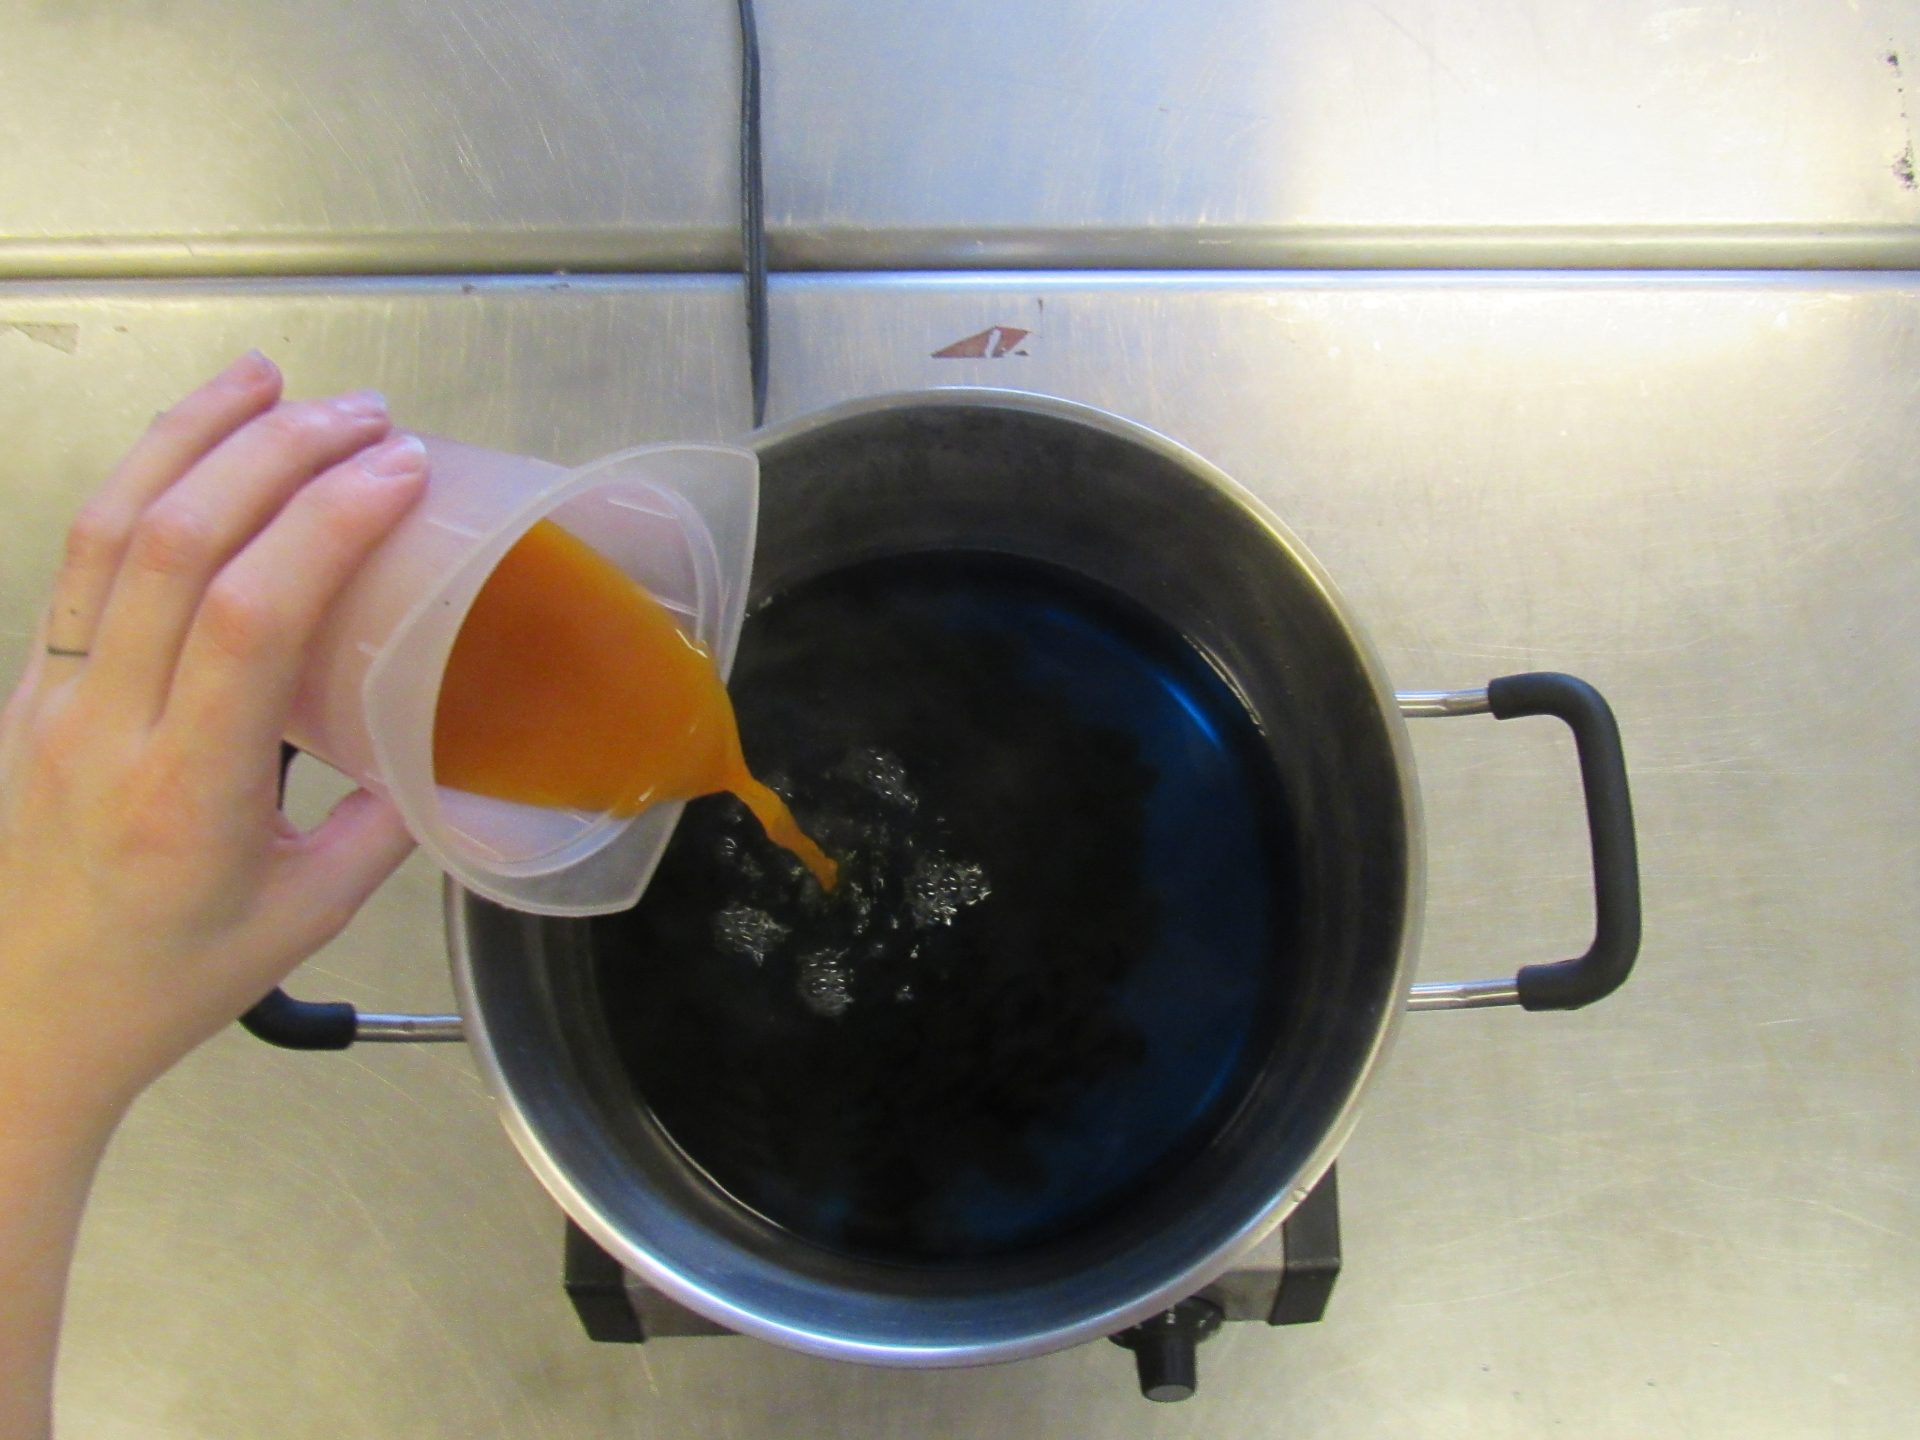 a hand pouring an orange liquid from a plastic beaker into a dyepot with blue liquid in it. You can see the two colors mixing in the dyepot.